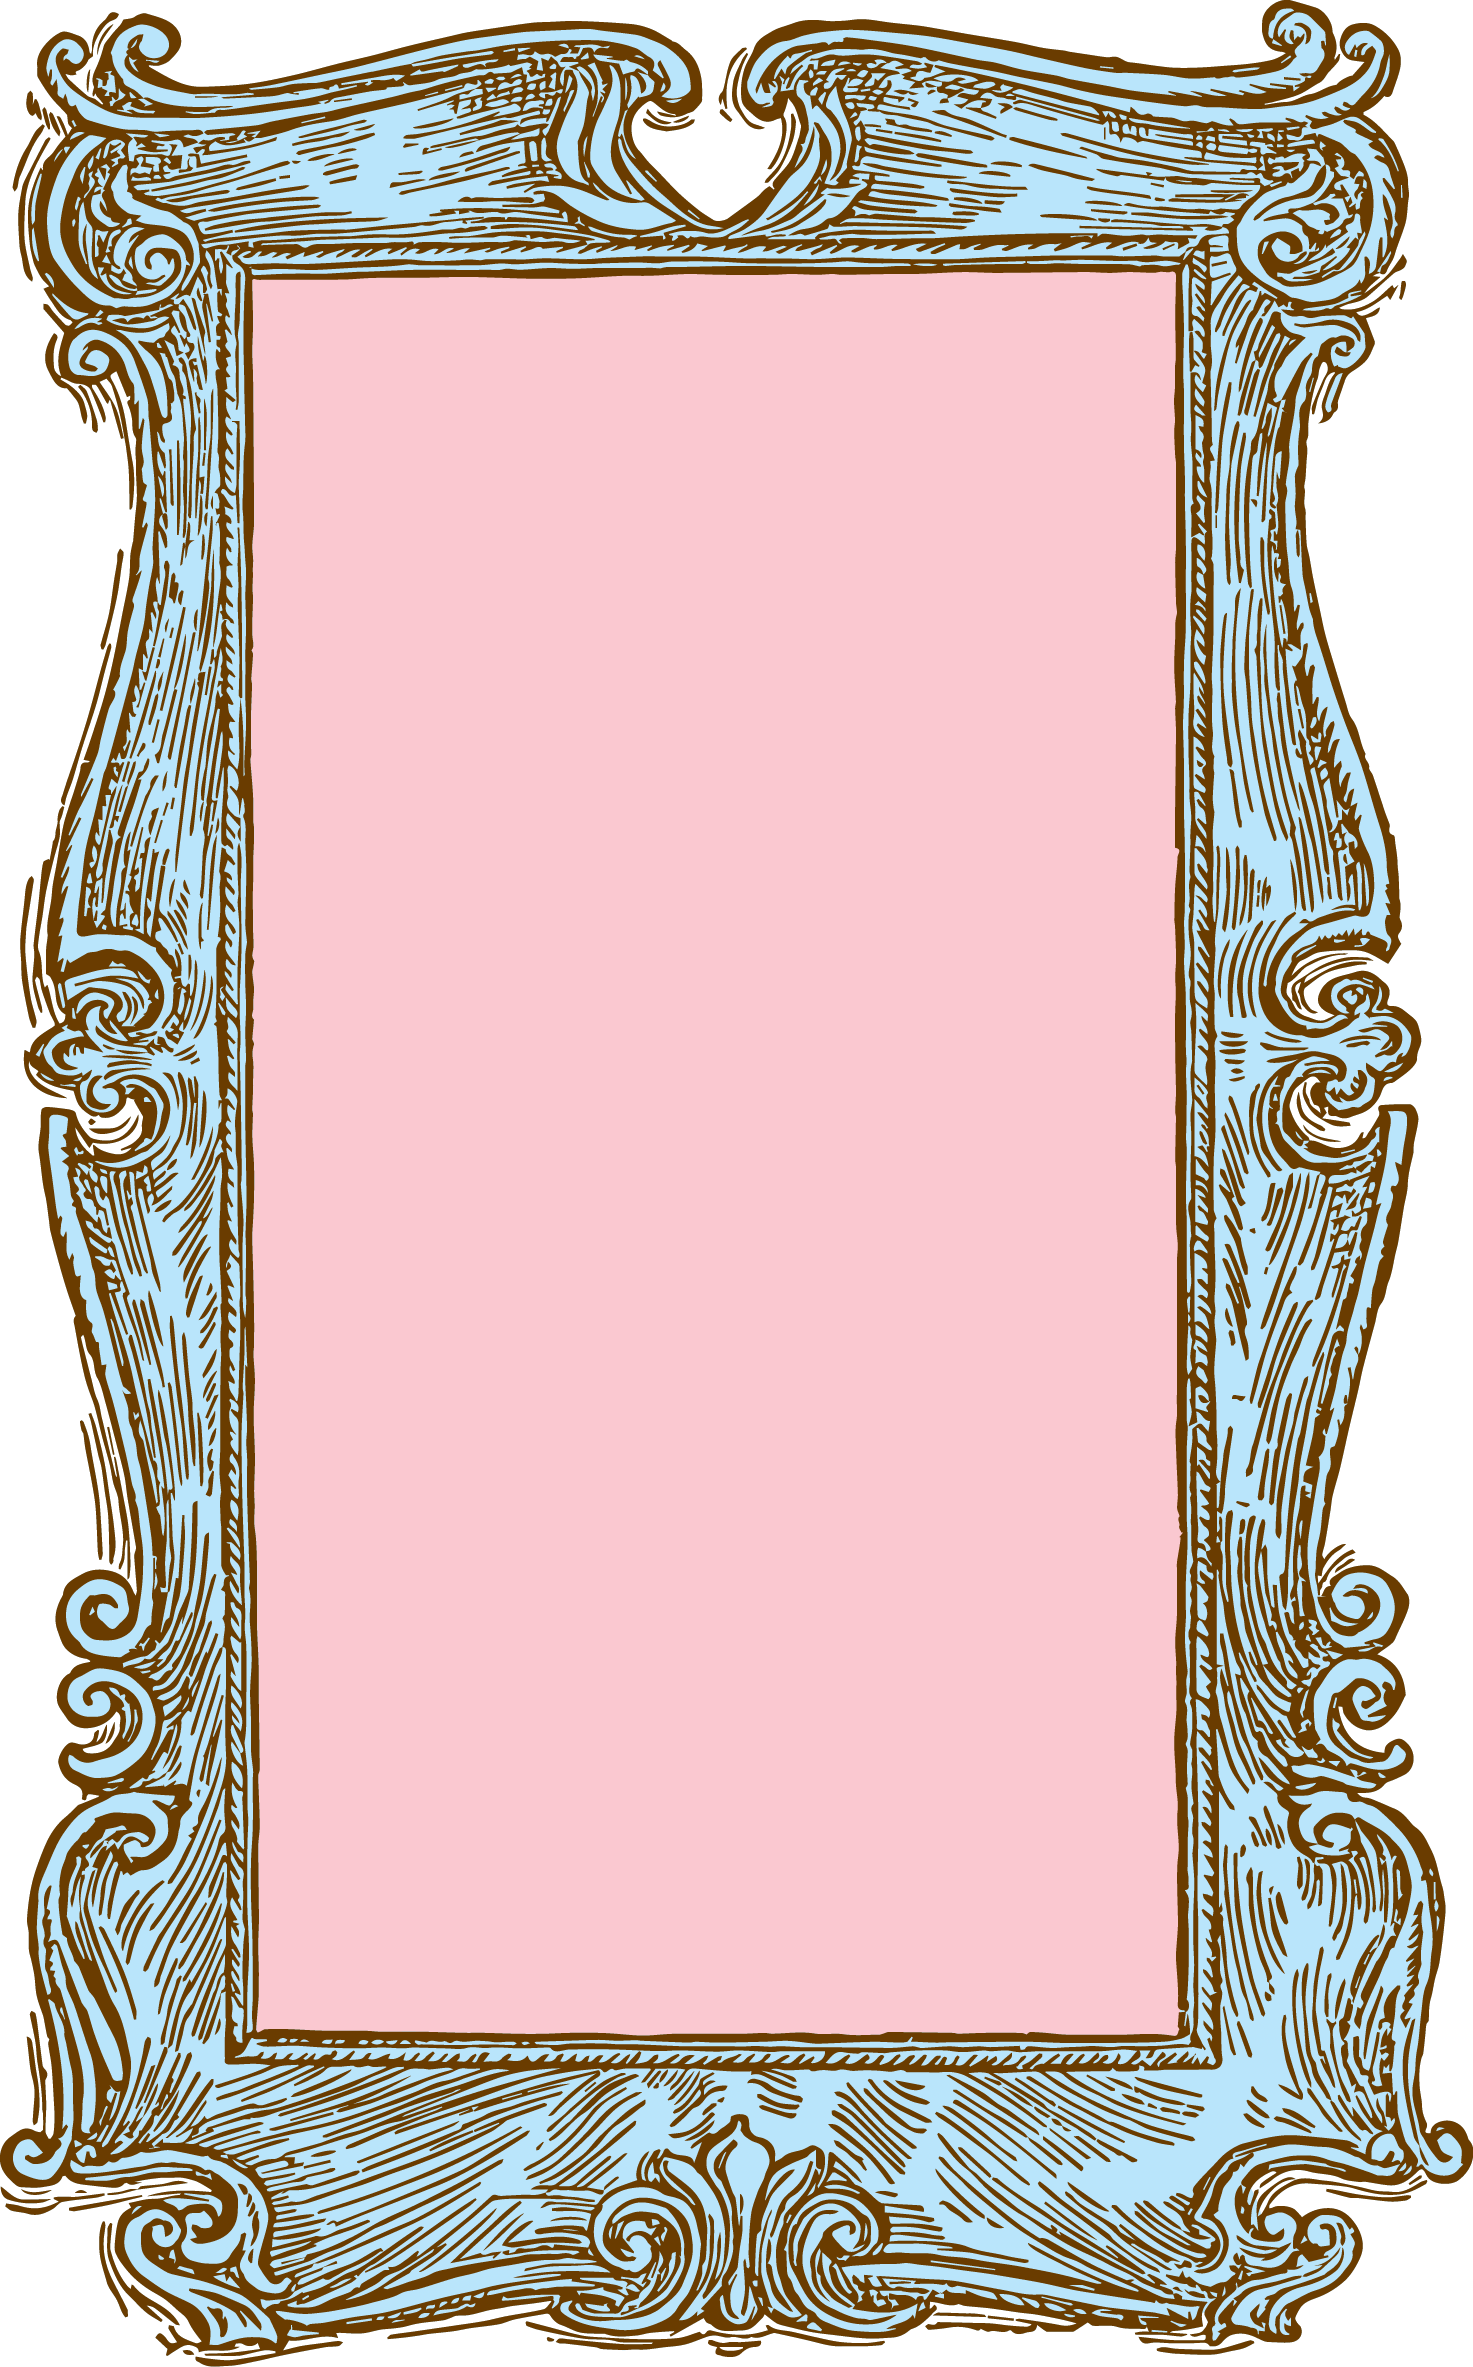 Old wood frame clipart 